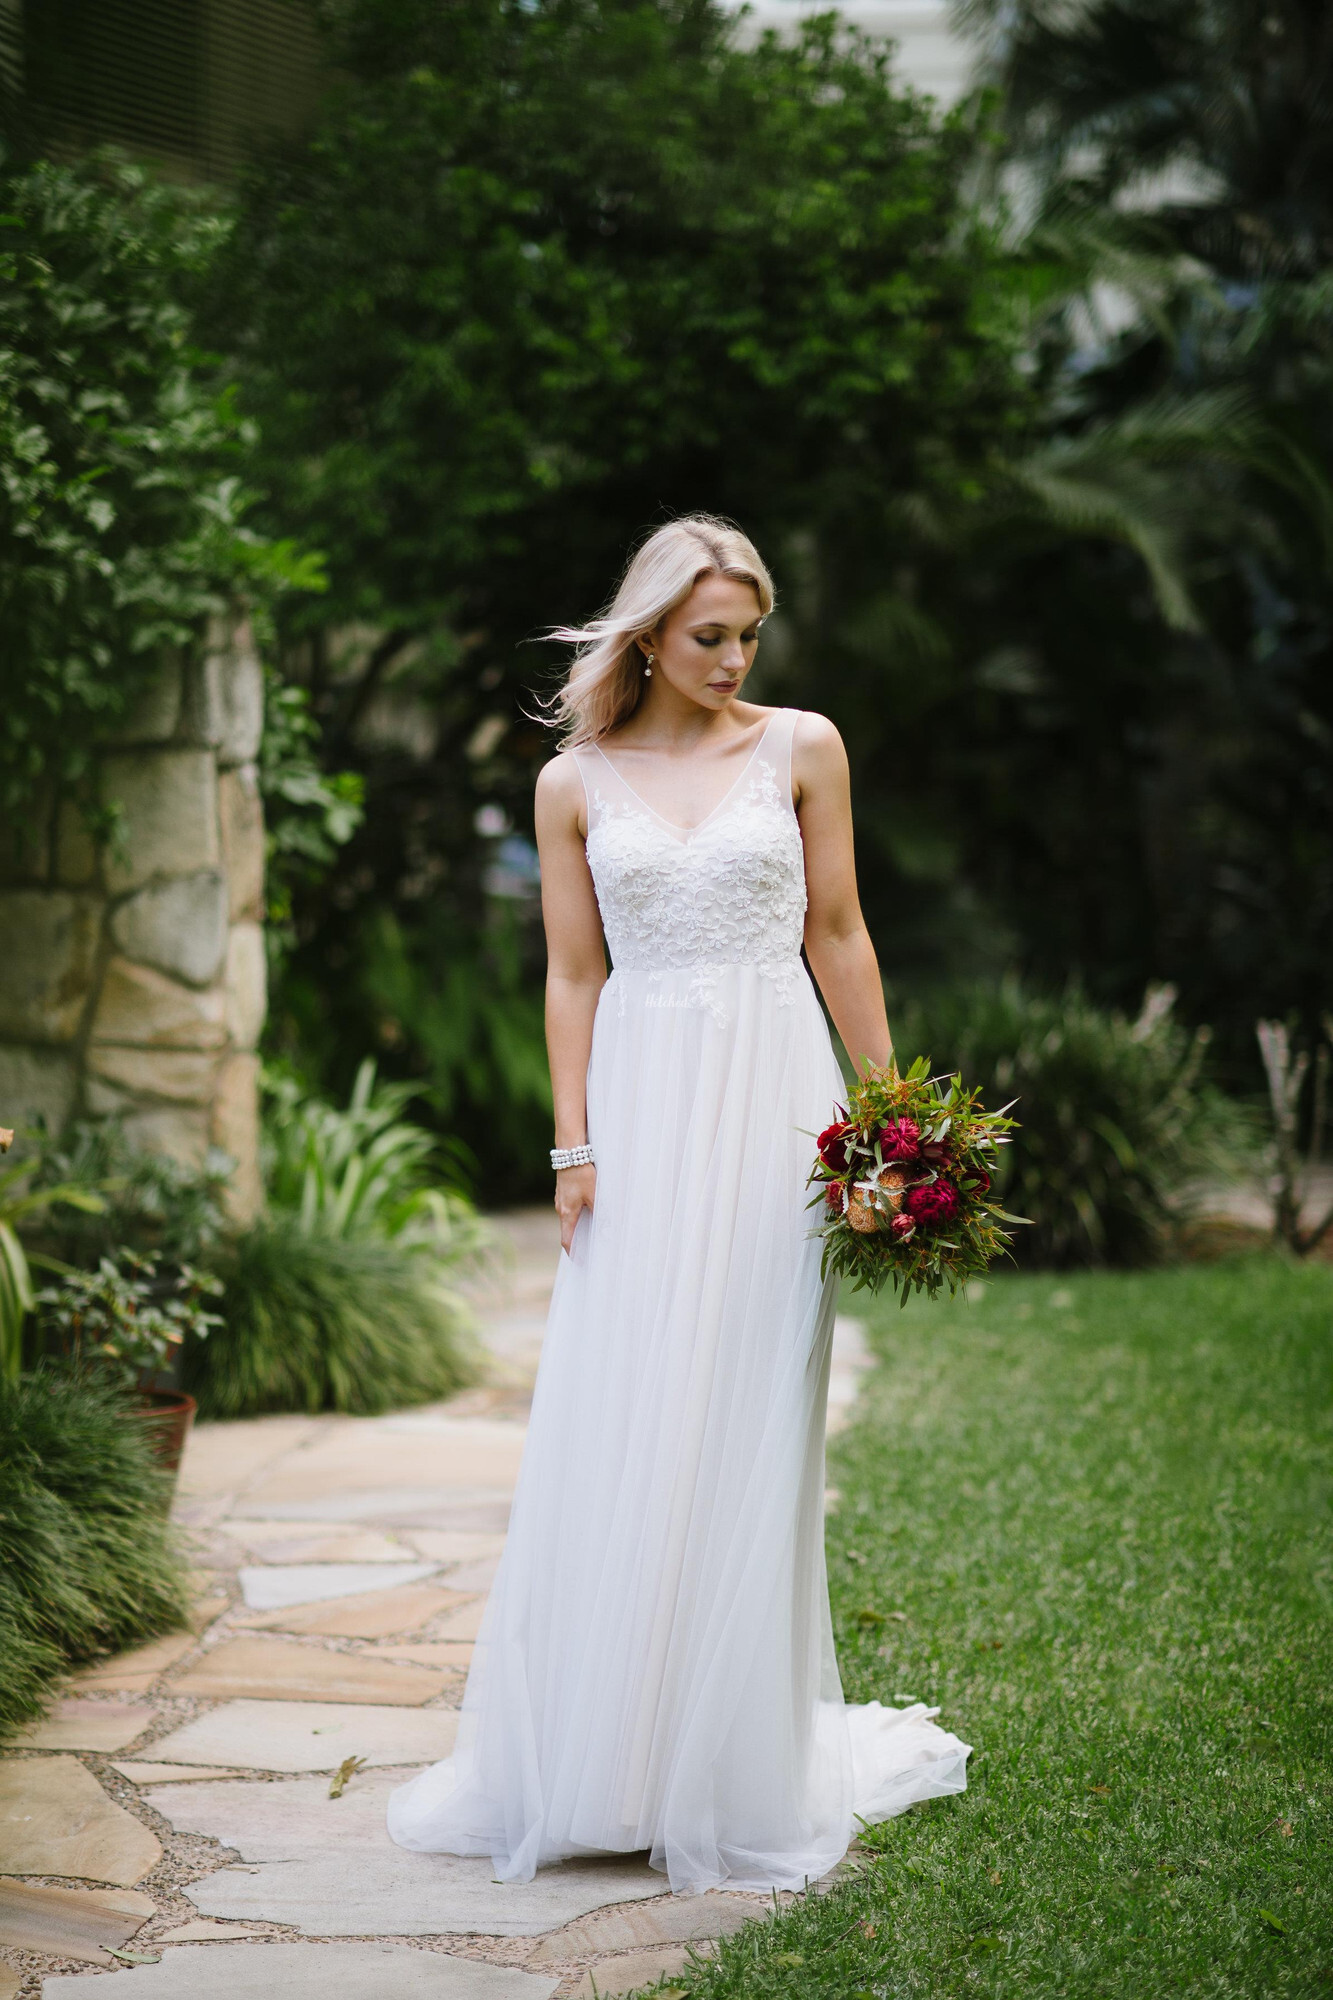 Anouk Wedding Dress from French Collection by Wendy Makin - hitched.co.uk